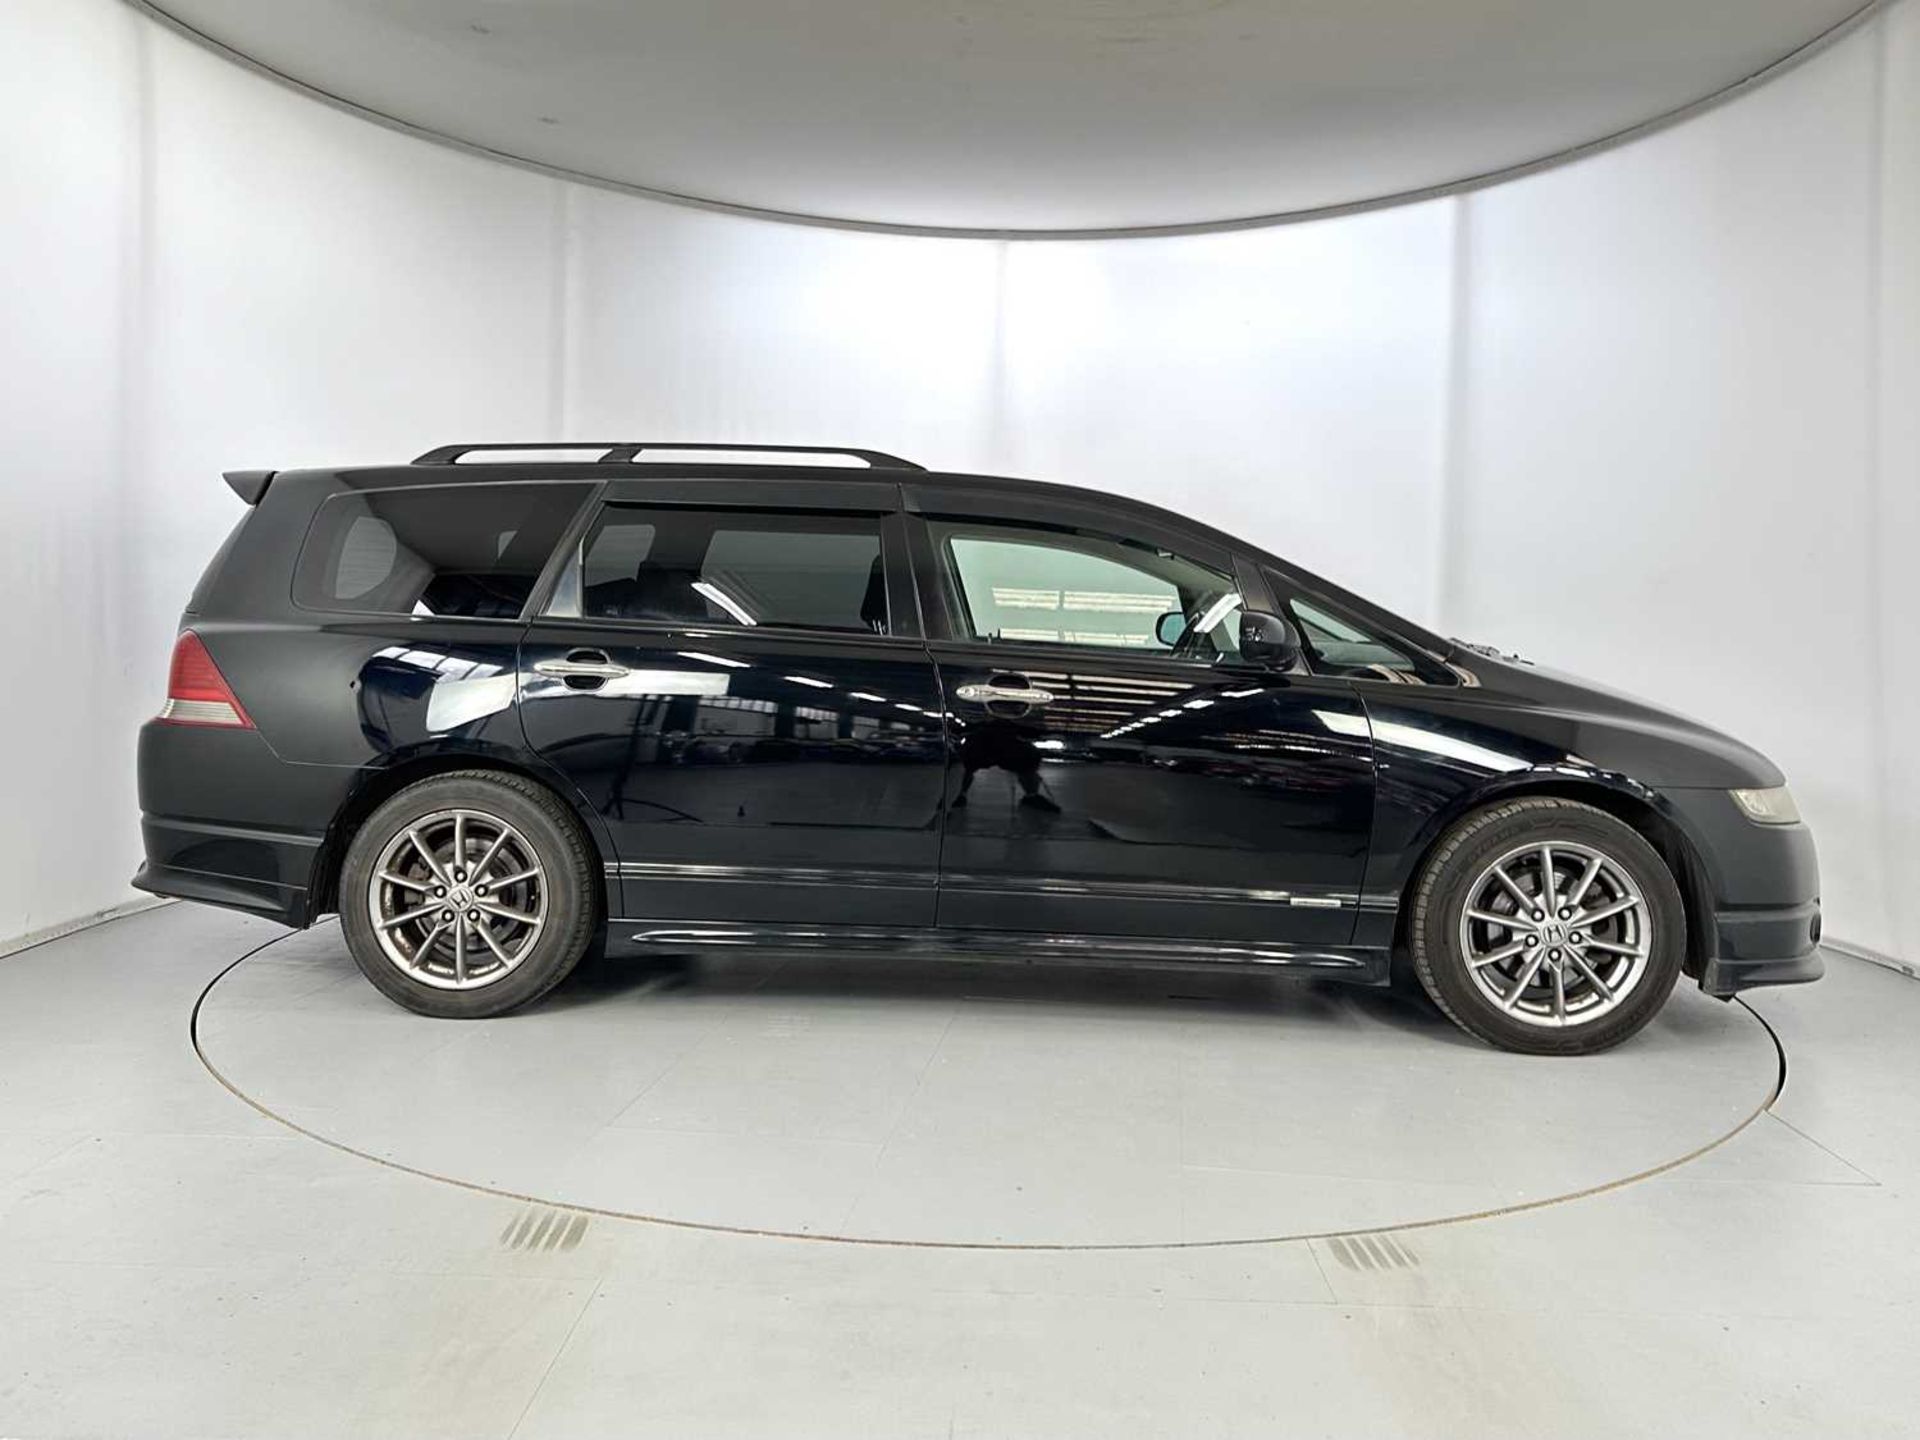 2005 Honda Odyssey RB1 Absolute - Image 11 of 36